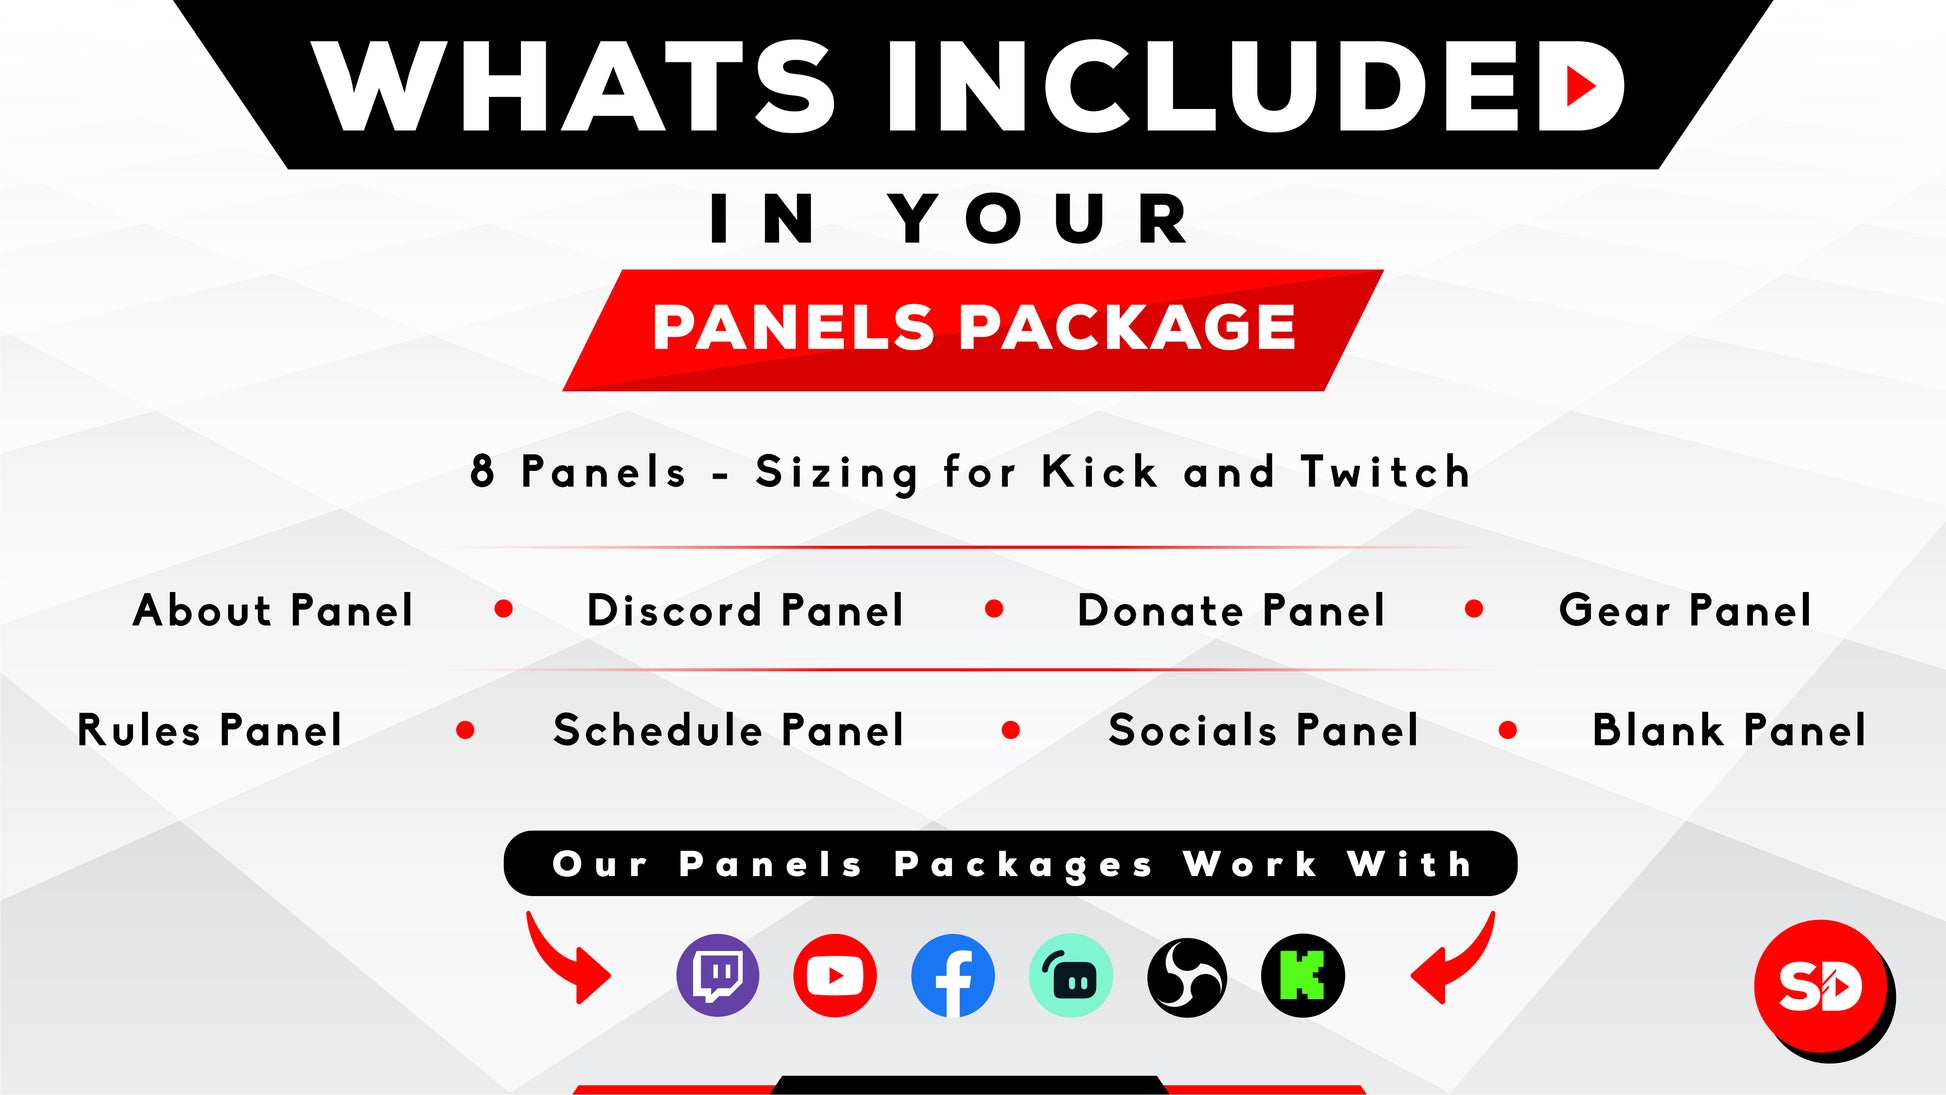 whats included in your package twitch panels illuminate stream designz